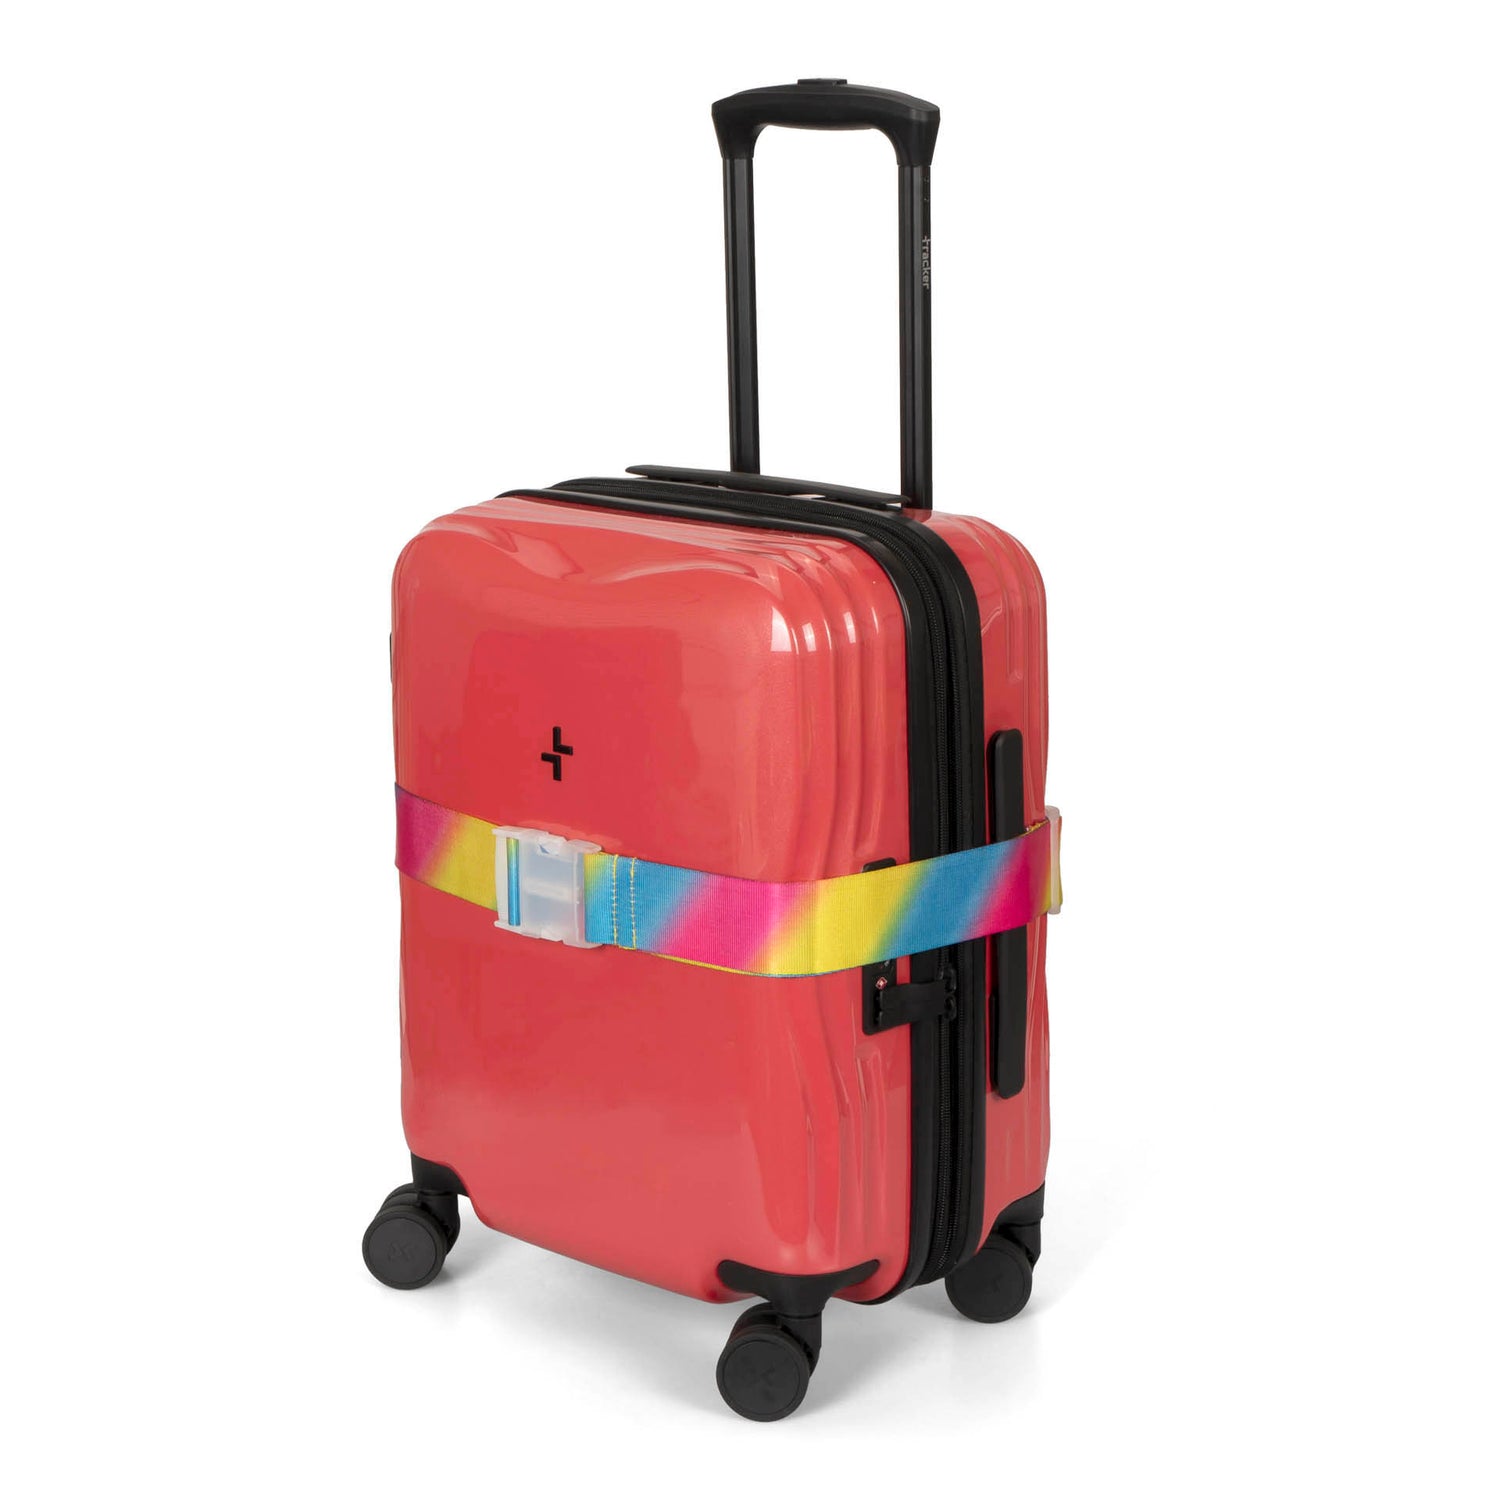 A colourful luggage strap called Rainbow designed by Tracker wrapped aorund a coral-coloured luggage that has its telescopic handle opened, showing its vibrant colours.